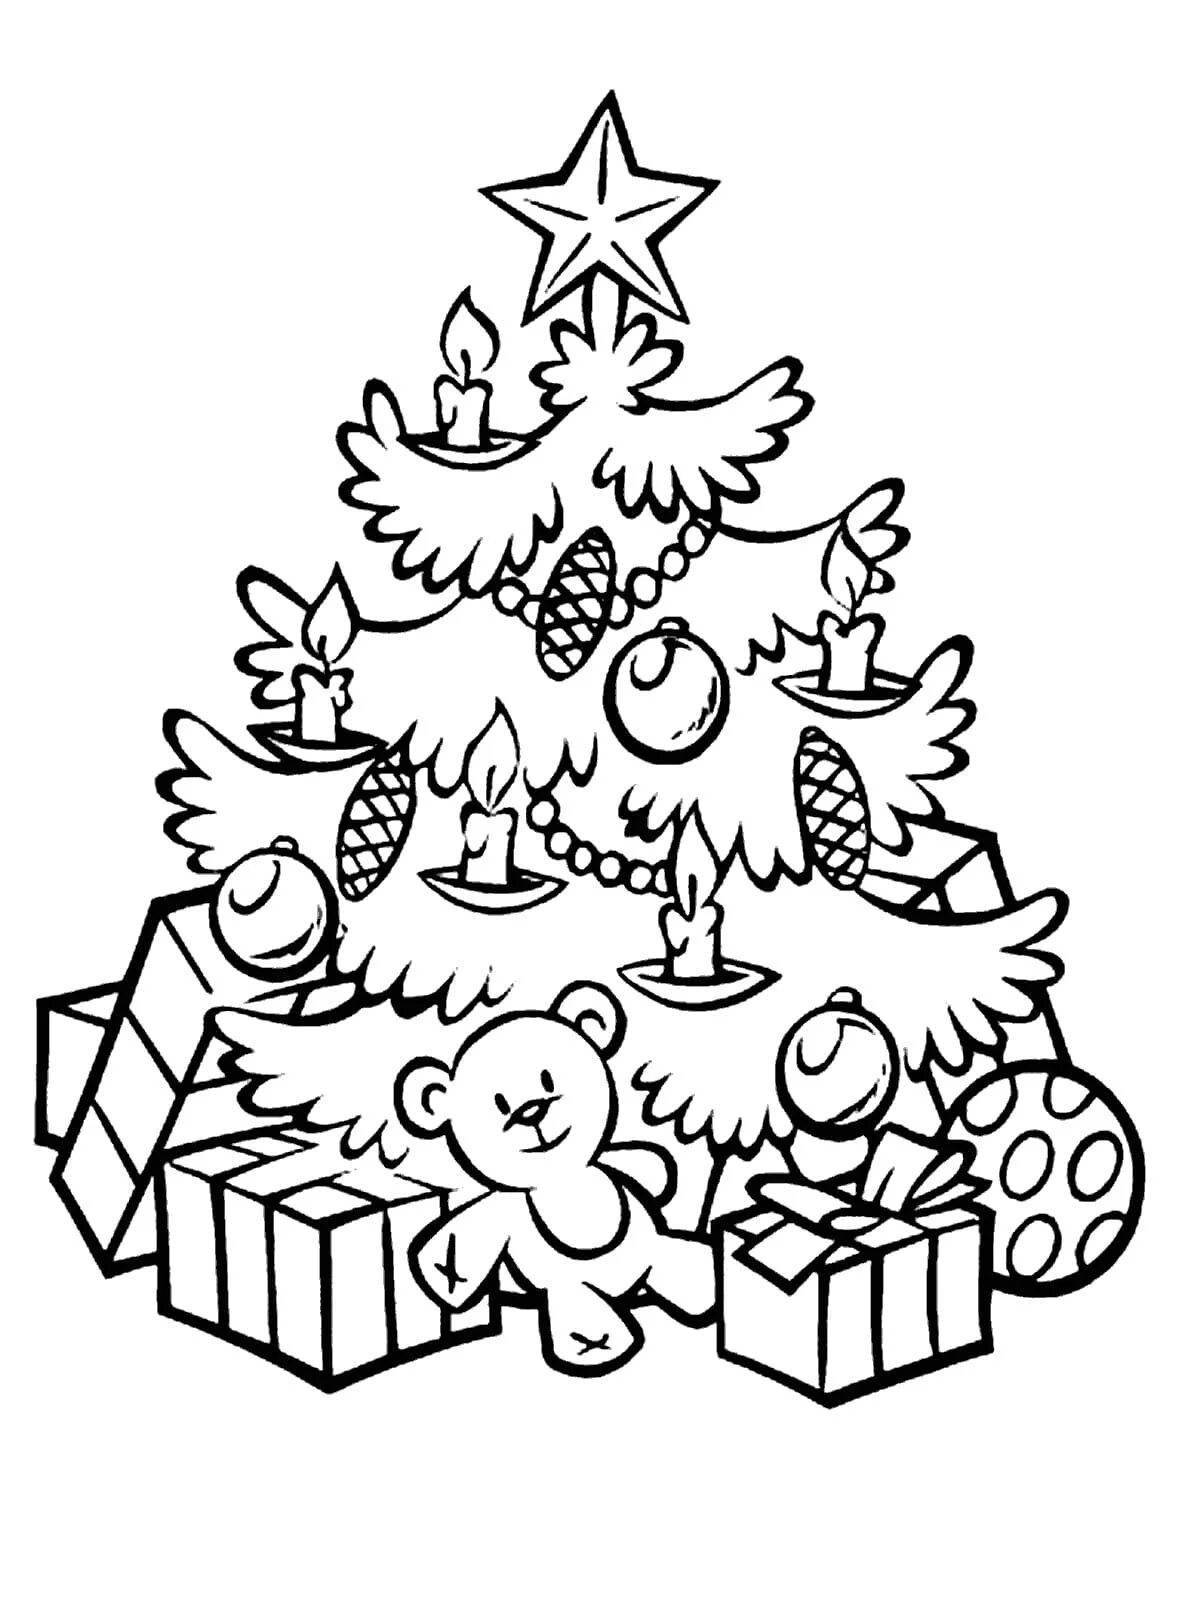 Luxurious Christmas tree with toys